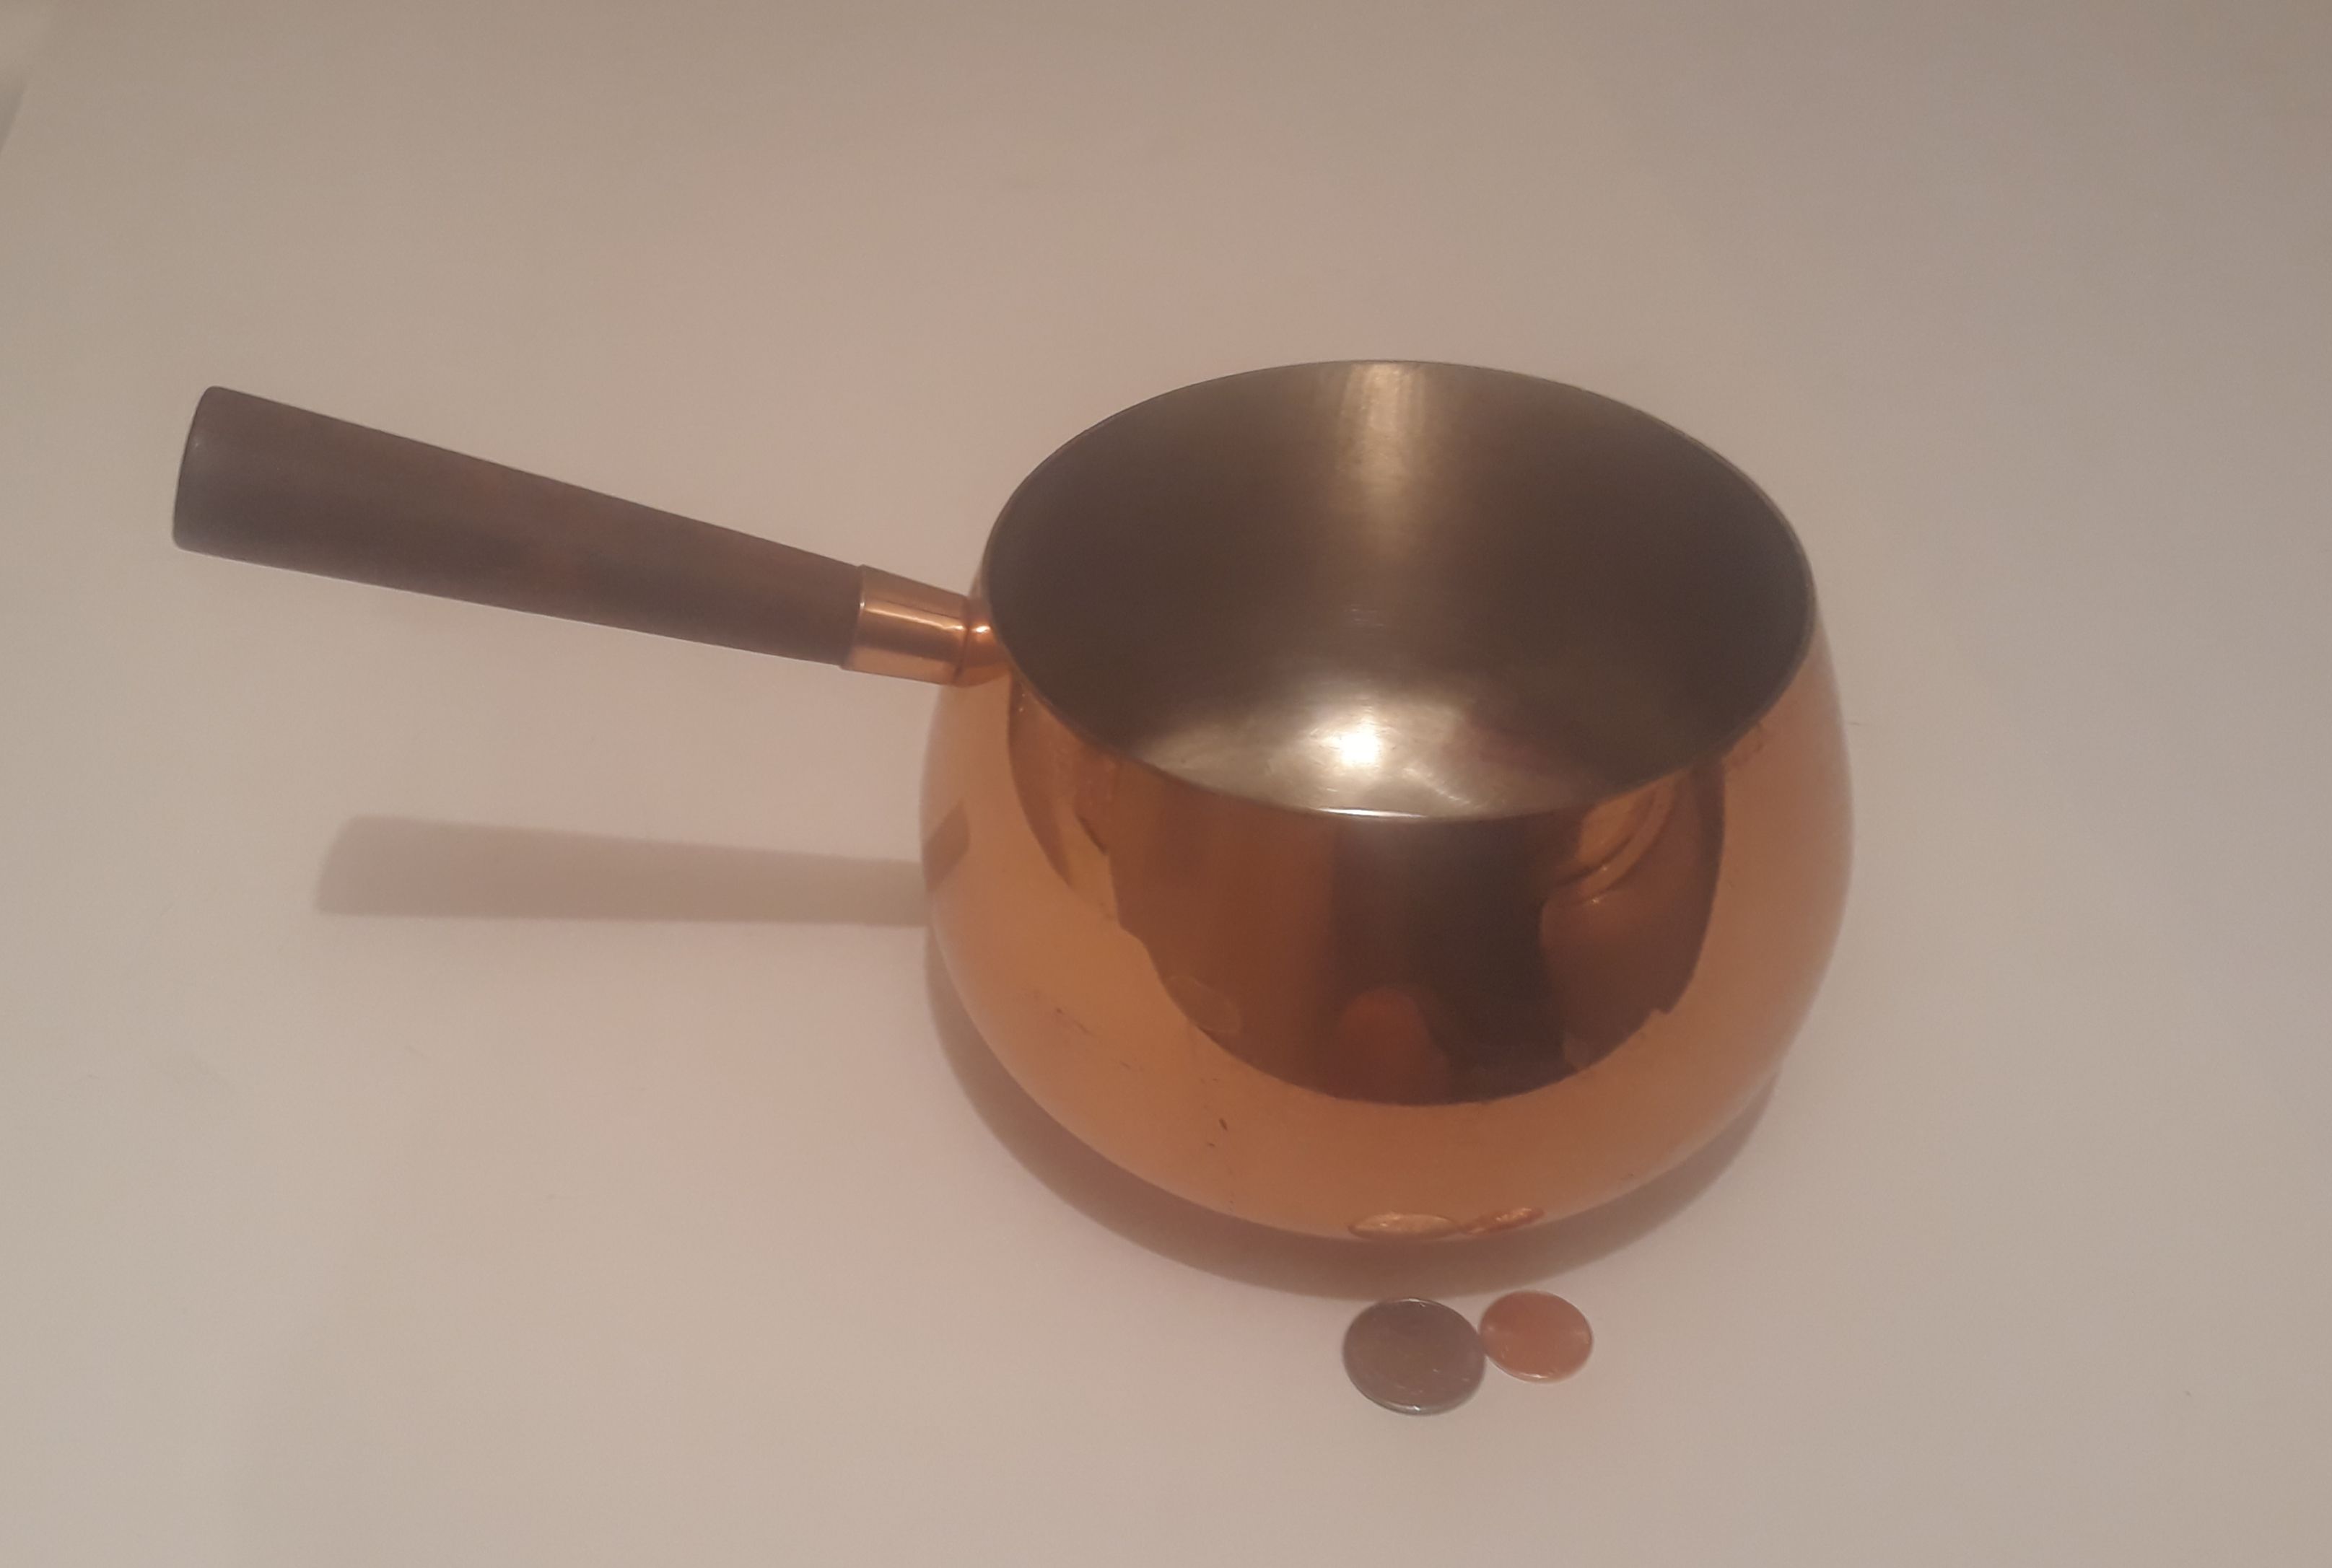 Vintage Copper Metal Cooking Pot with Wooden Handle, 10" Long, and 6" x 4" Pot Size, Kitchen Decor, Shelf Display, Cooking,